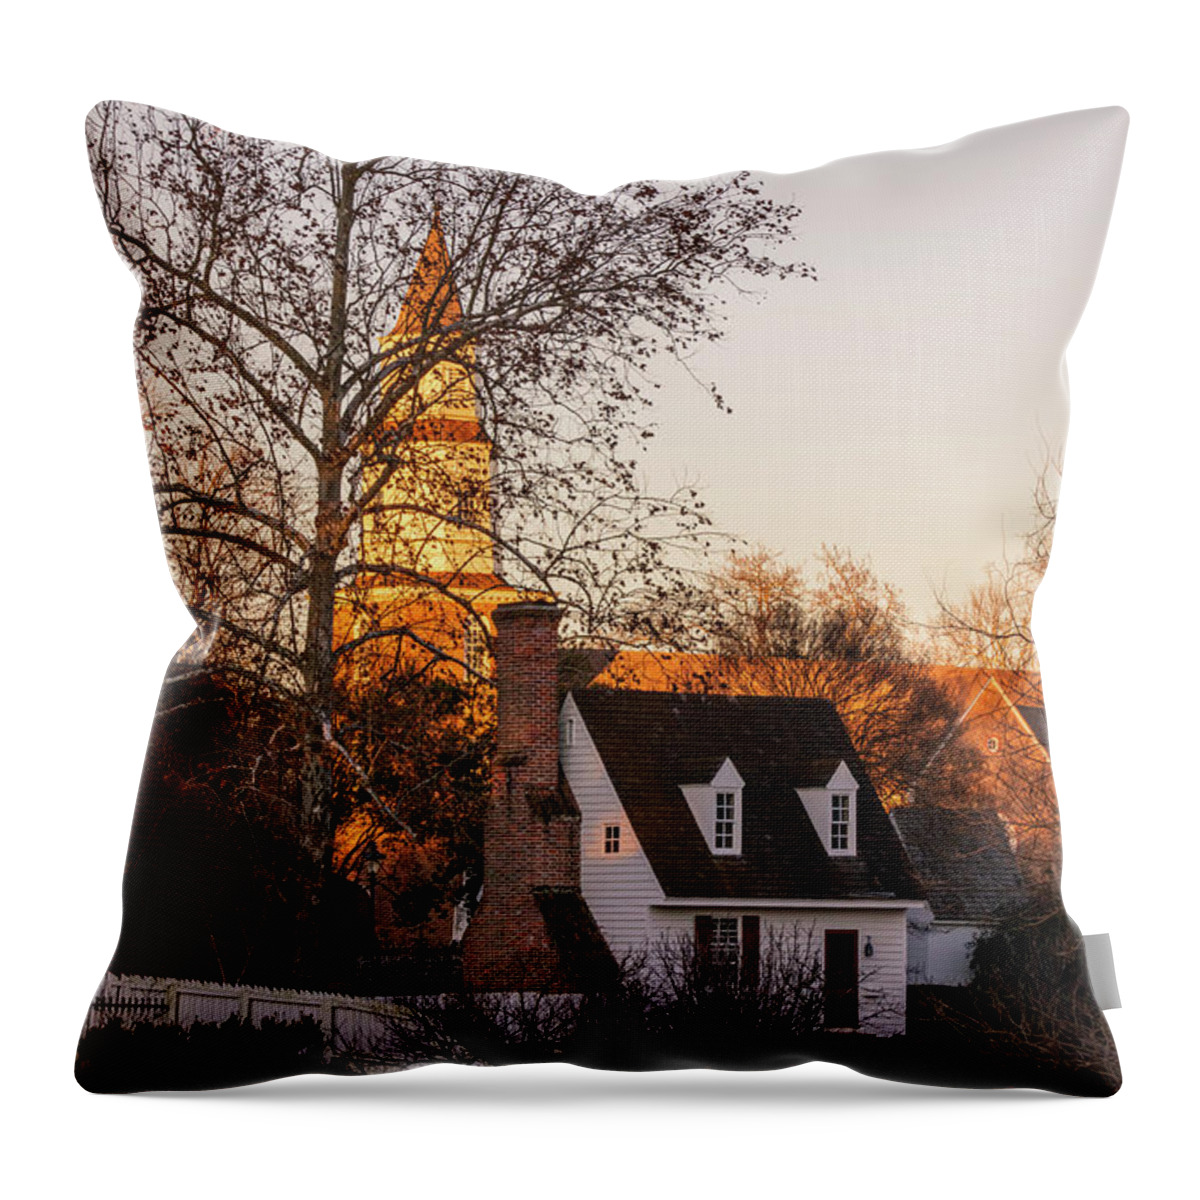 Colonial Williamsburg Throw Pillow featuring the photograph Williamsburg Sunset by Rachel Morrison